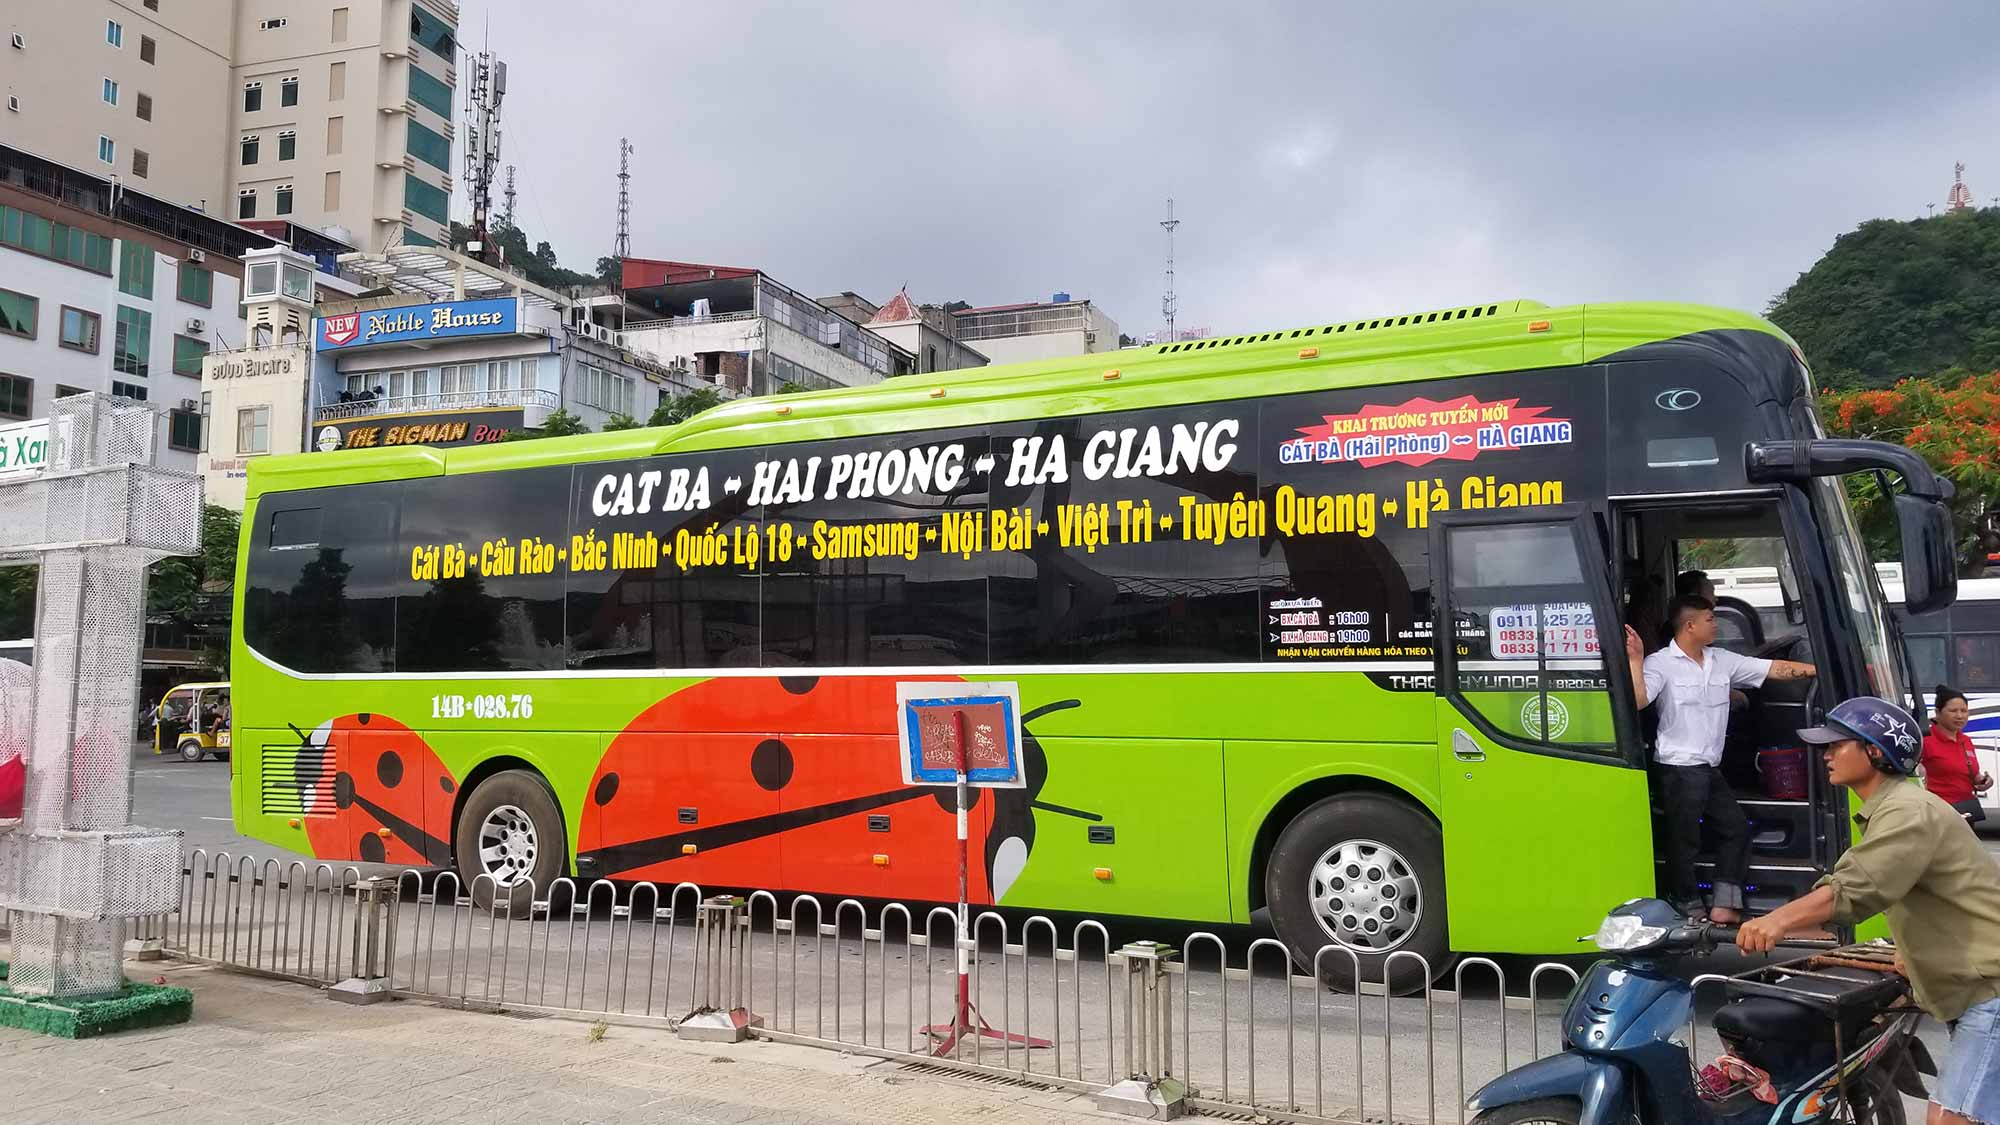 Bus-from-ha-giang-to-cat-ba-island